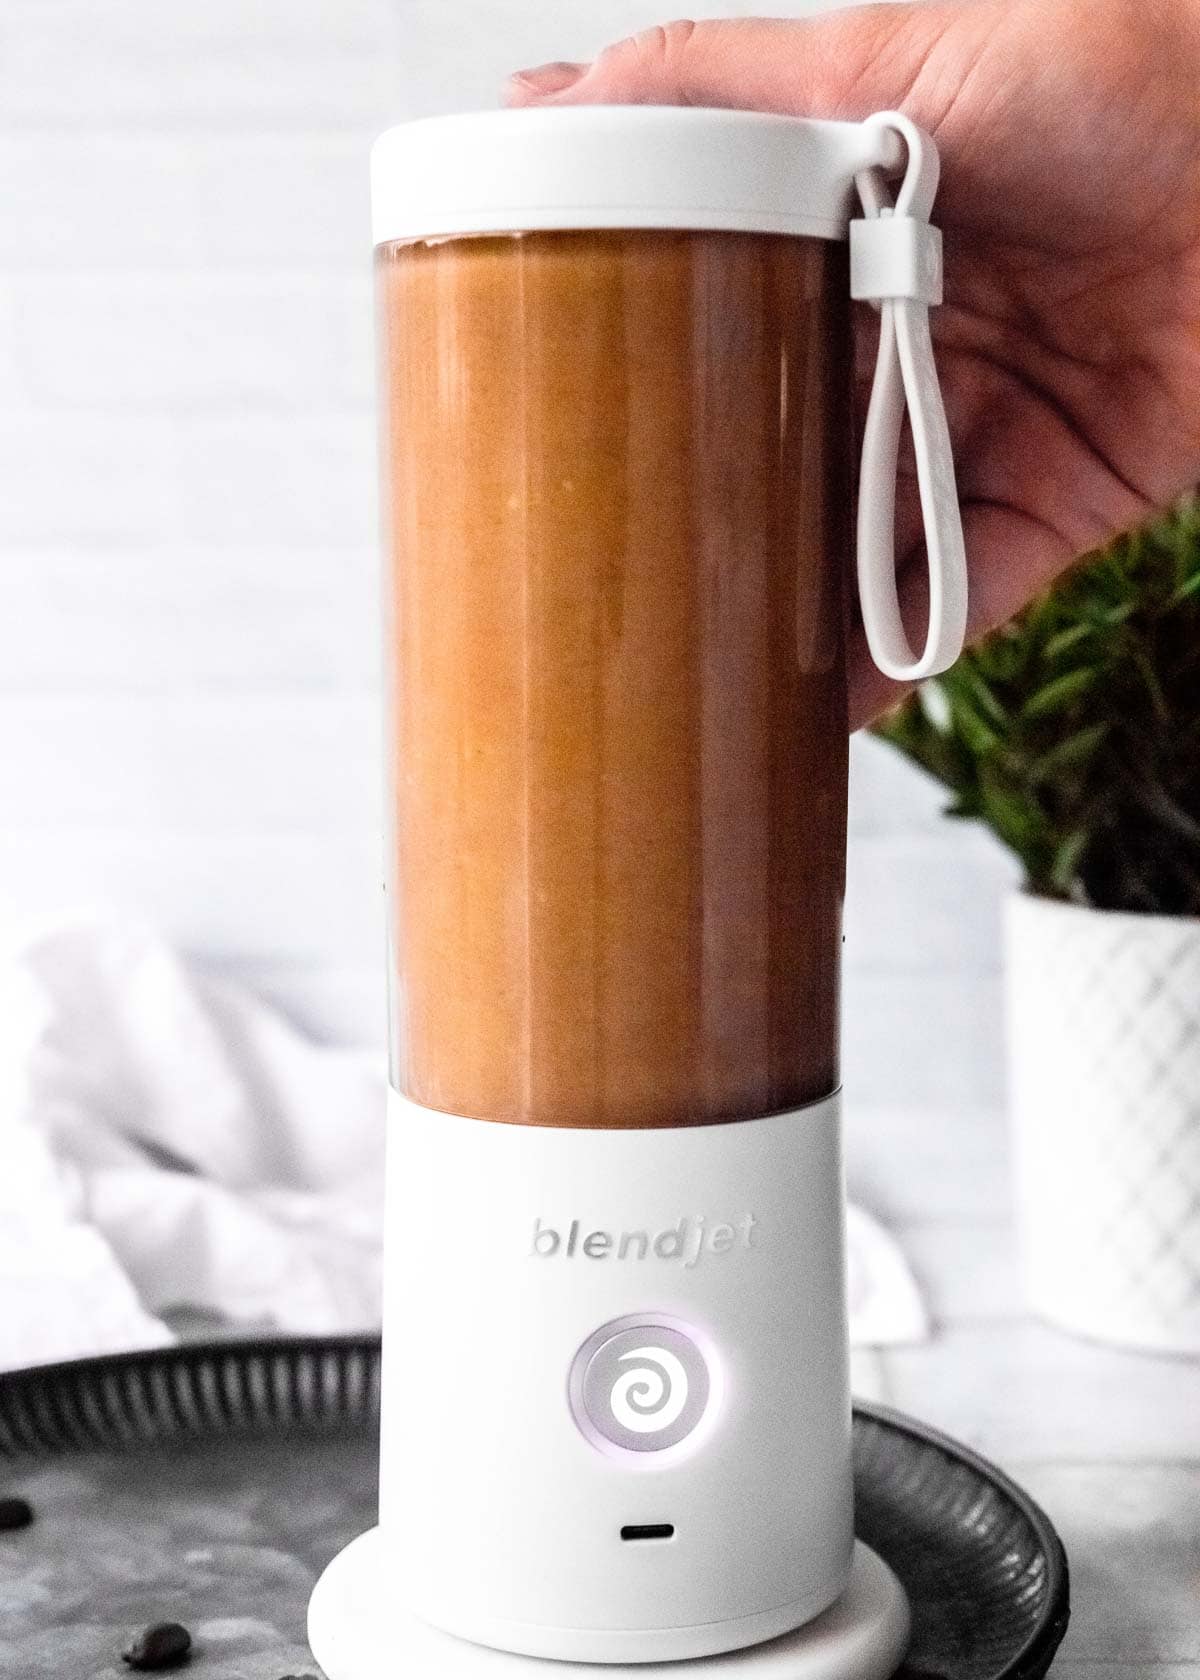 keto smoothie made of coffee, avocado, coconut milk, and peanut butter in a blender